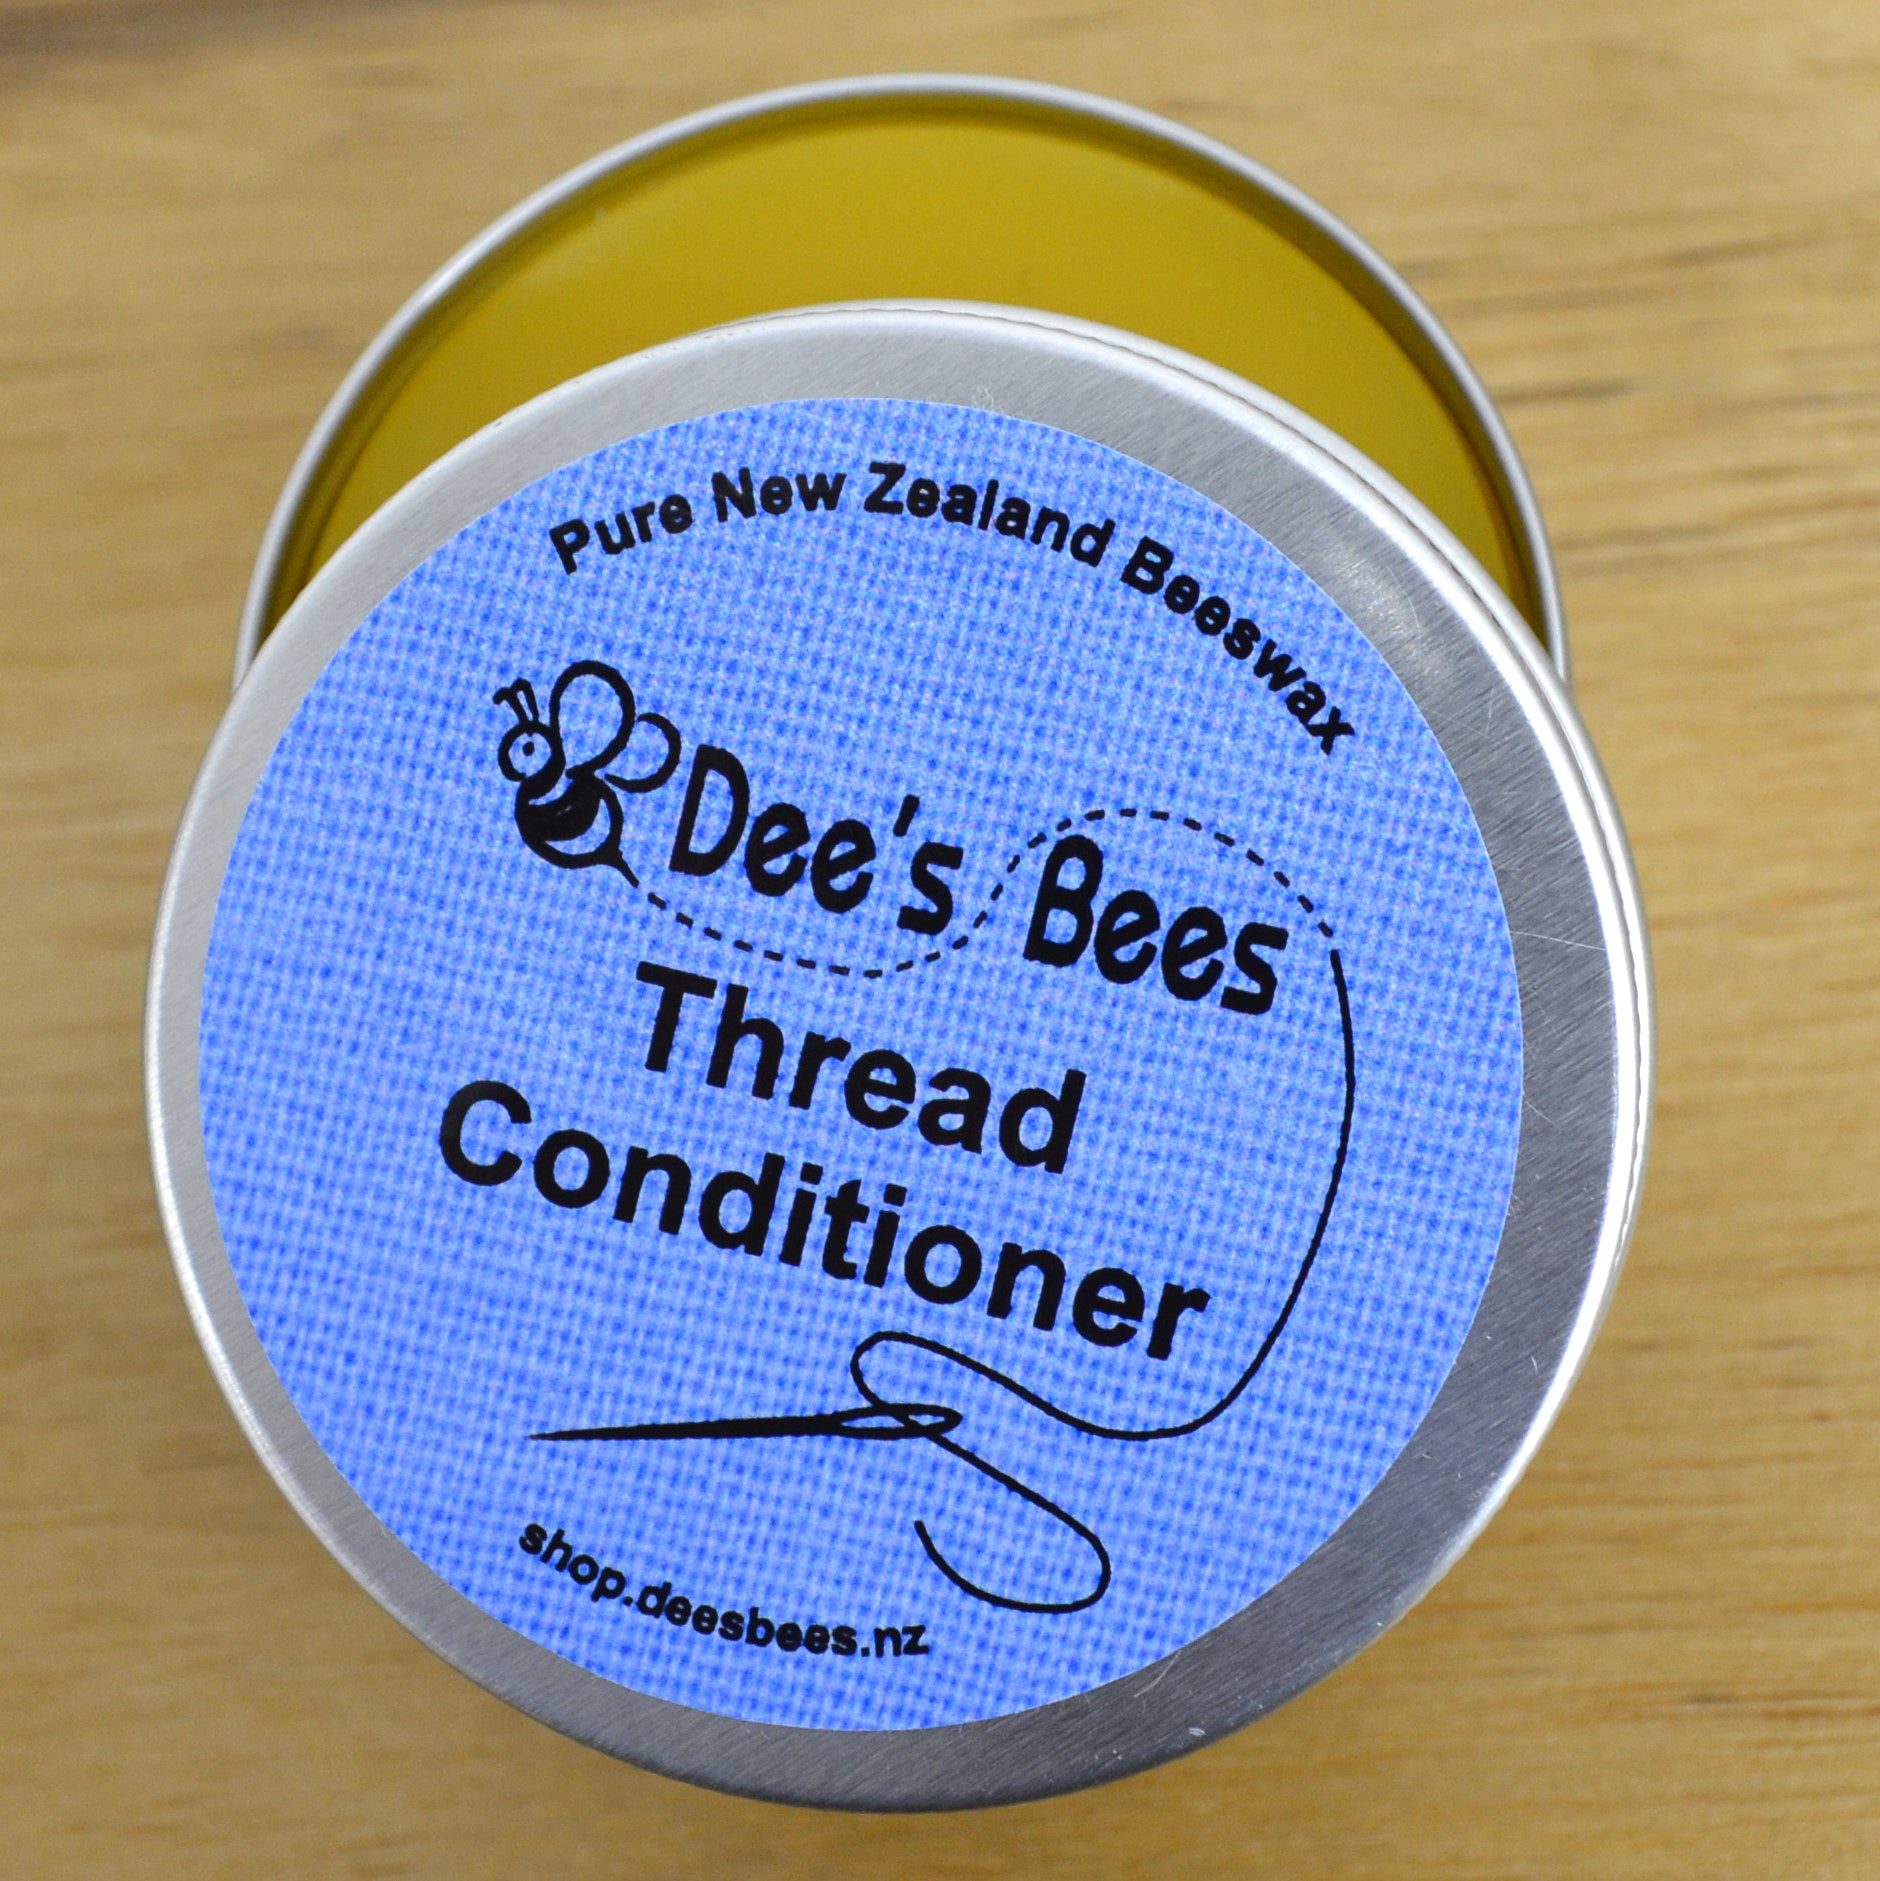 Beeswax Thread Conditioner – Dee's Bees NZ